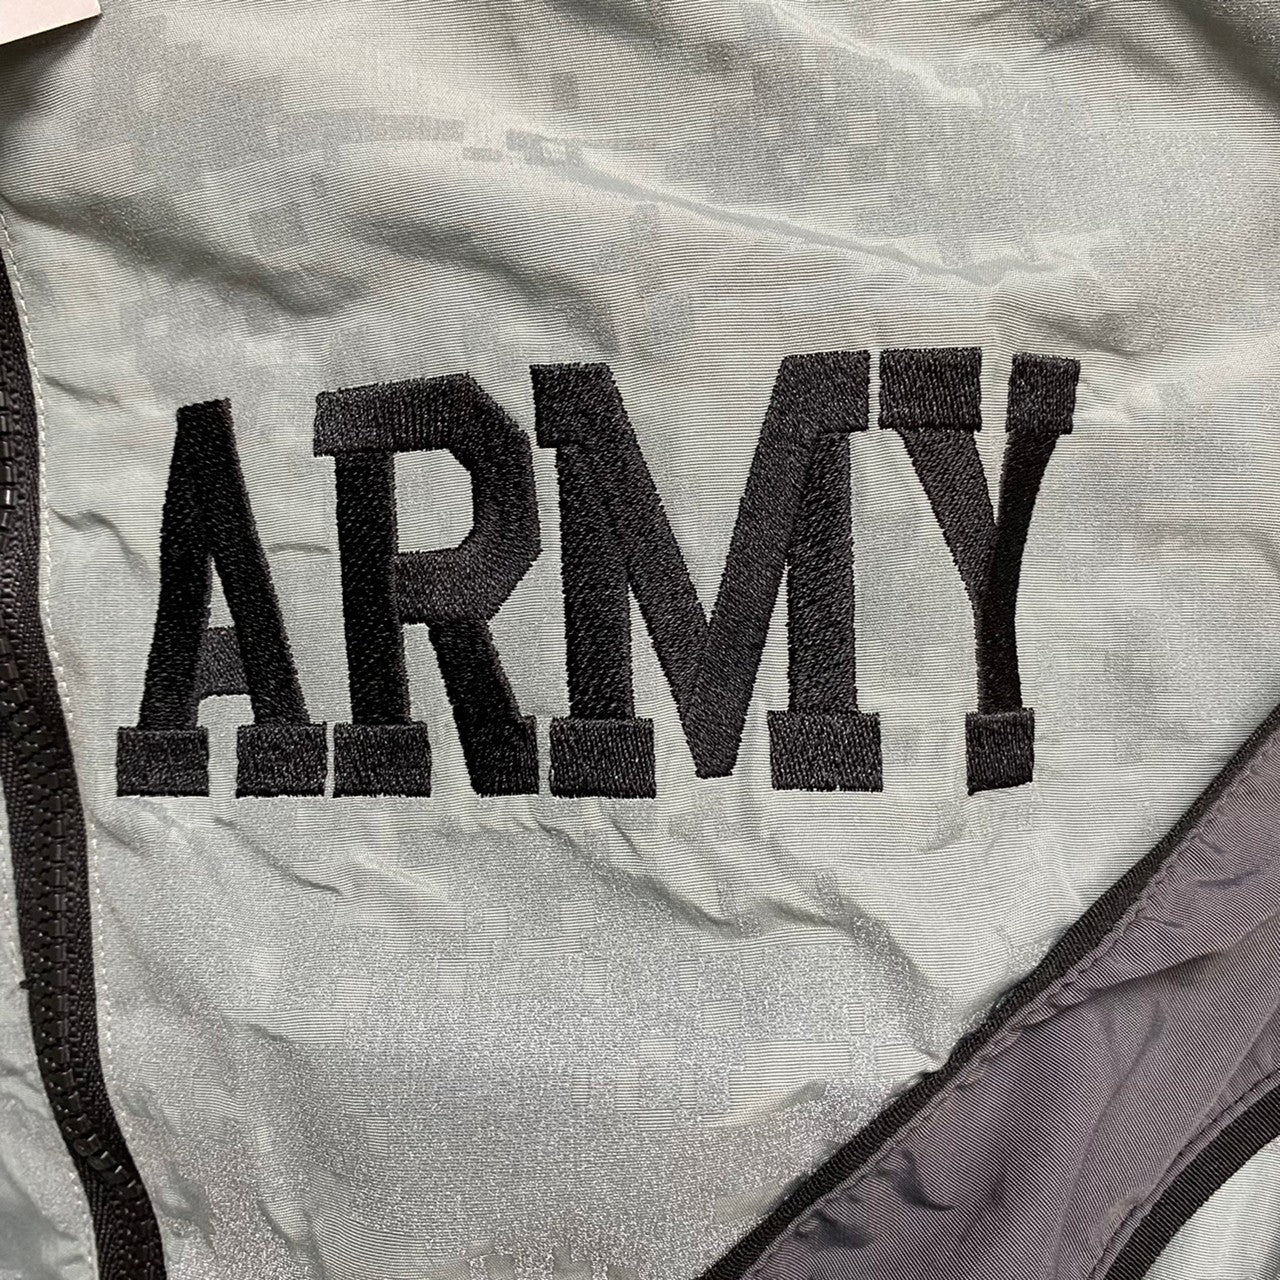 [ ONLY ONE ! ] US ARMY IPFU JACKET/ Mr.Clean Select